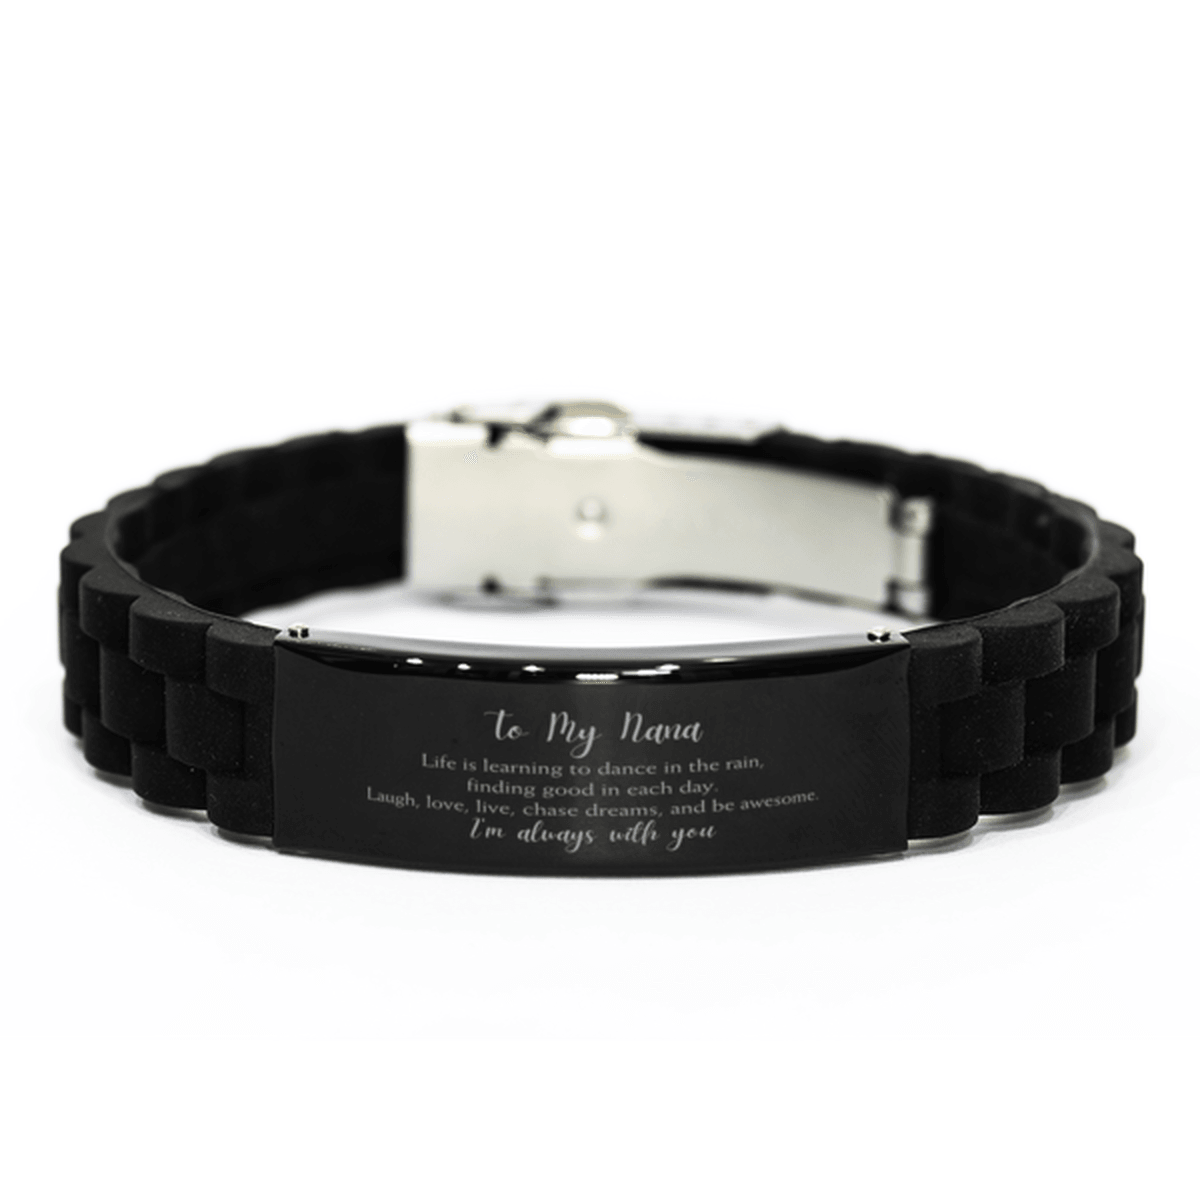 Nana Christmas Perfect Gifts, Nana Black Glidelock Clasp Bracelet, Motivational Nana Engraved Gifts, Birthday Gifts For Nana, To My Nana Life is learning to dance in the rain, finding good in each day. I'm always with you